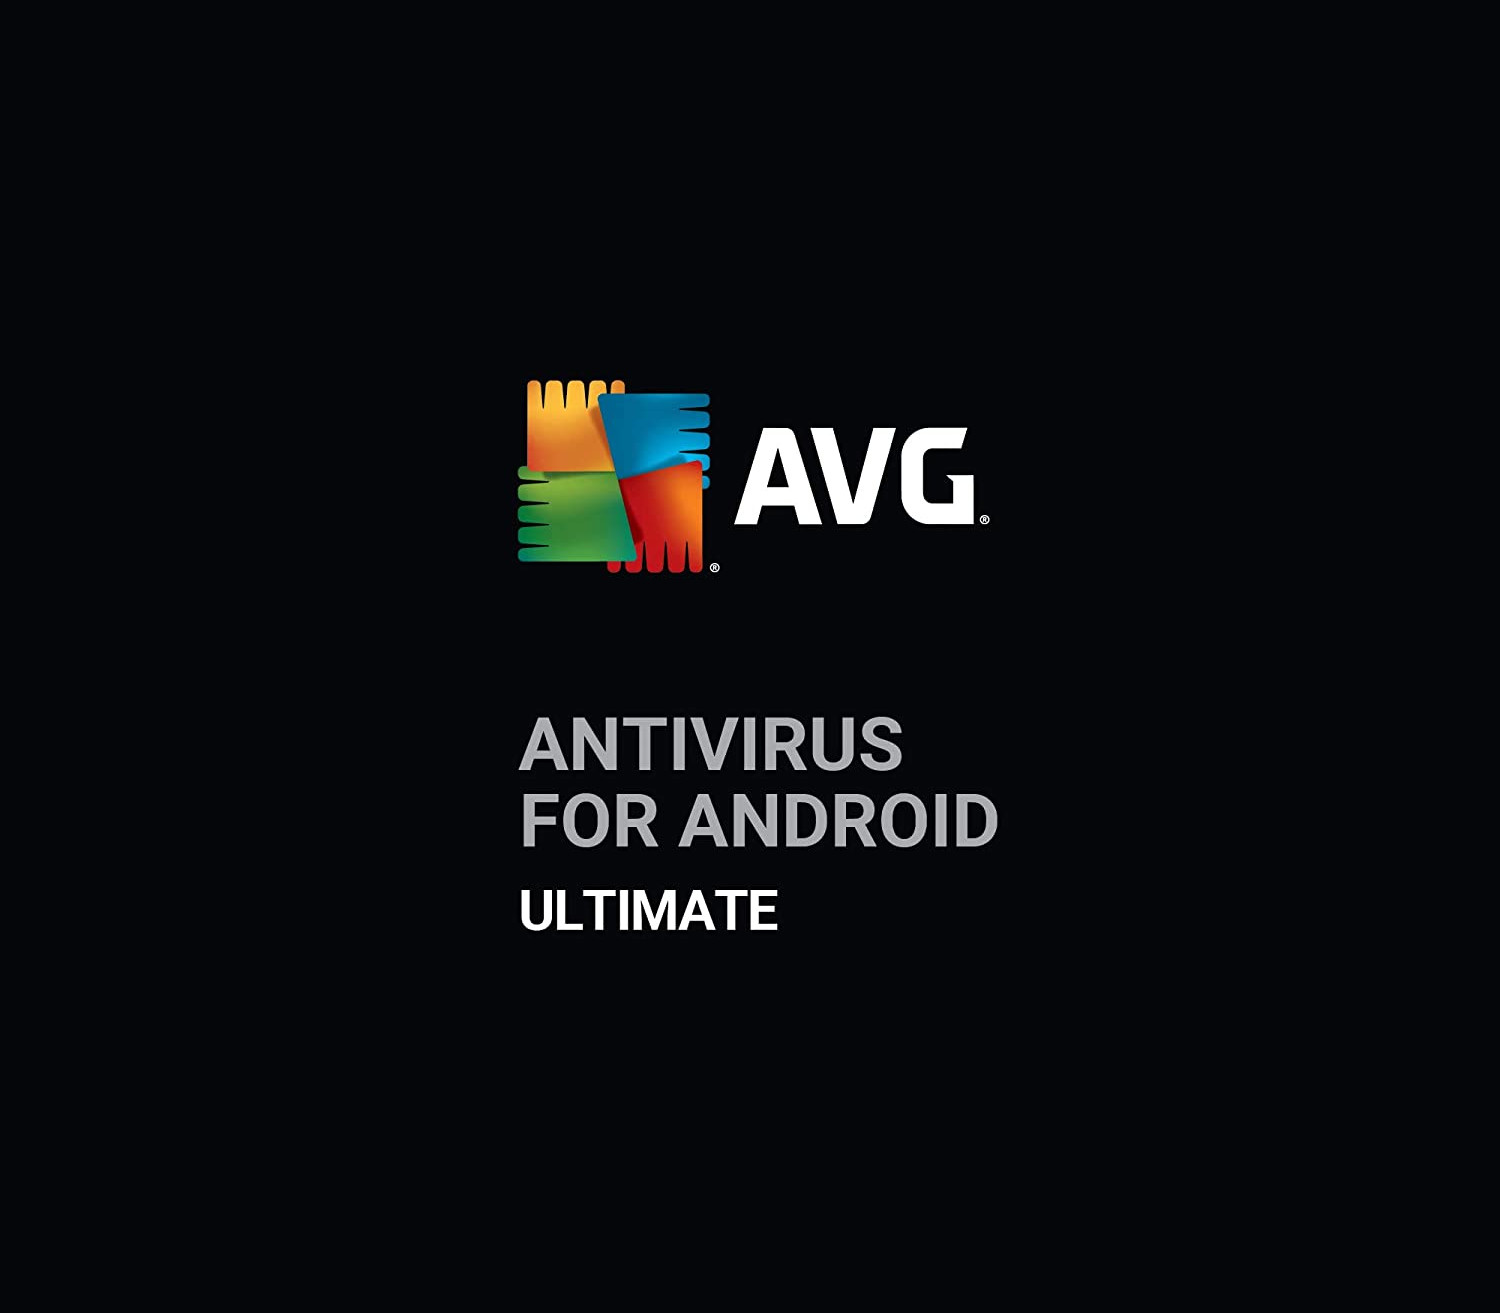 AVG Antivirus for Android - Ultimate Key (1 Year / 1 Device) 6.84 $